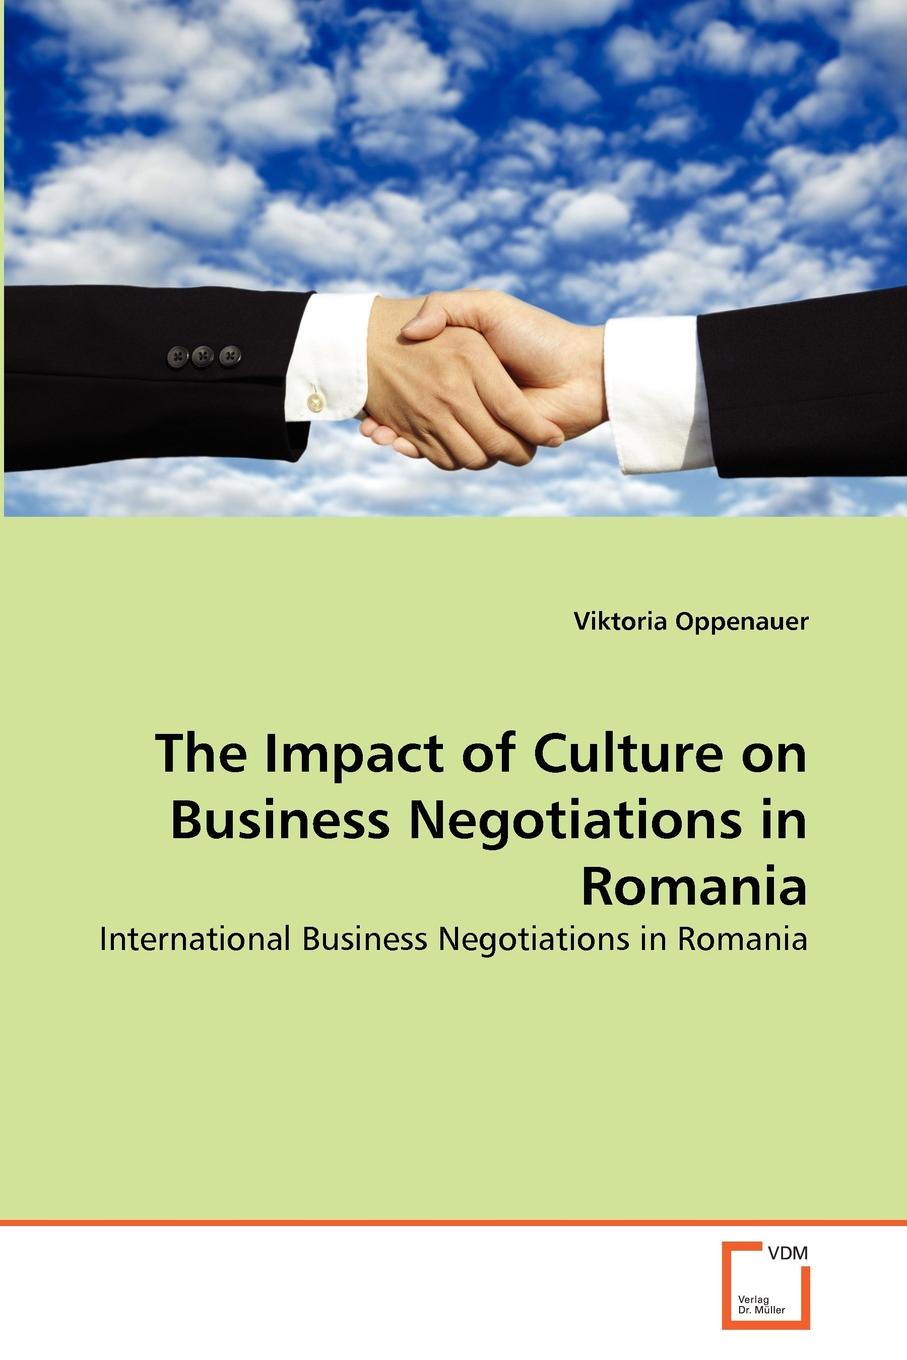 The Impact of Culture on Business Negotiations in Romania